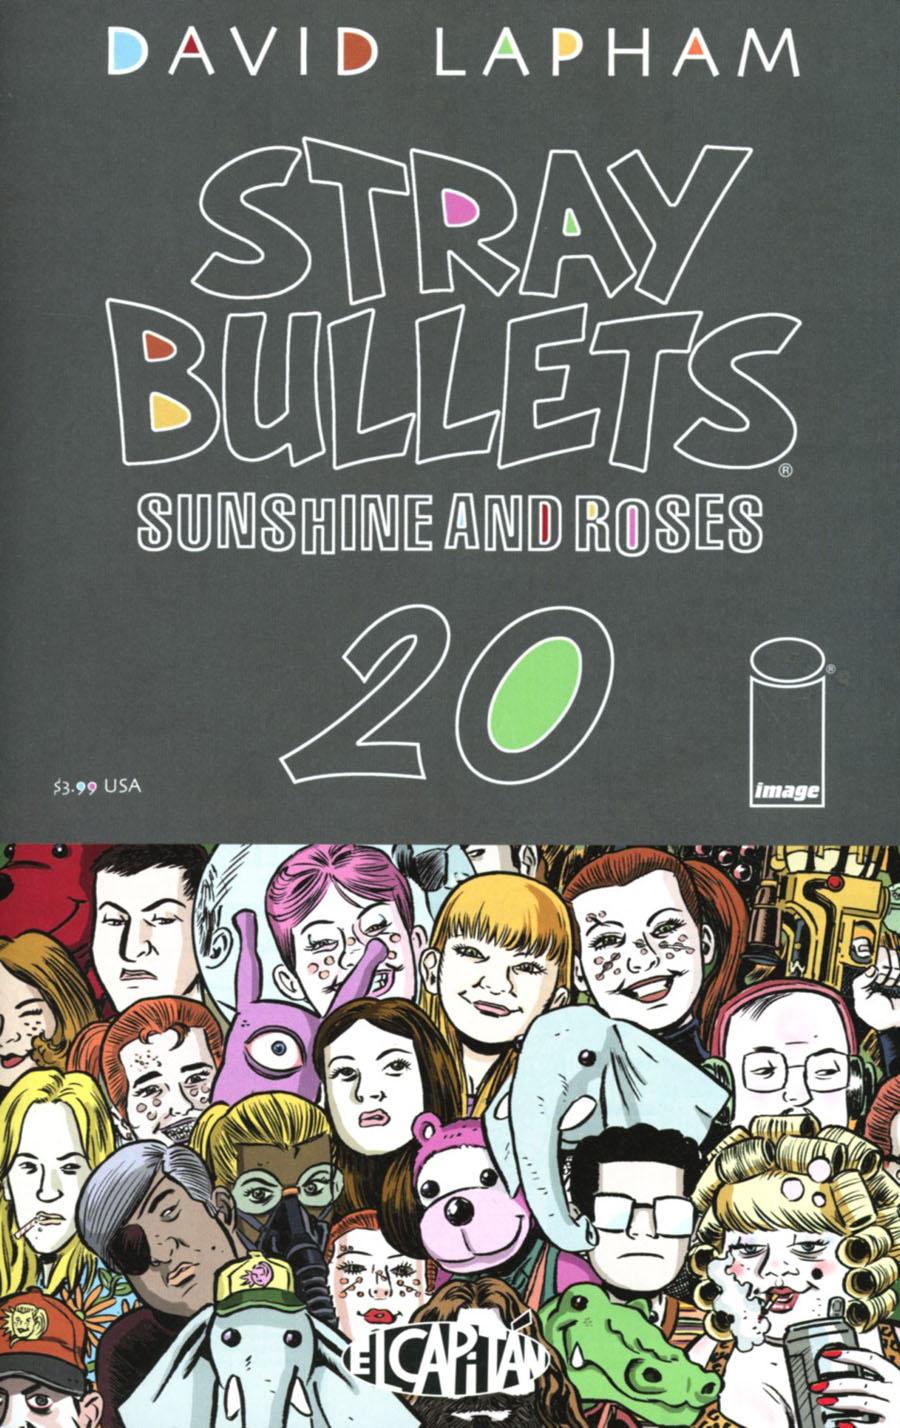 Stray Bullets Sunshine And Roses Vol. 1 #20